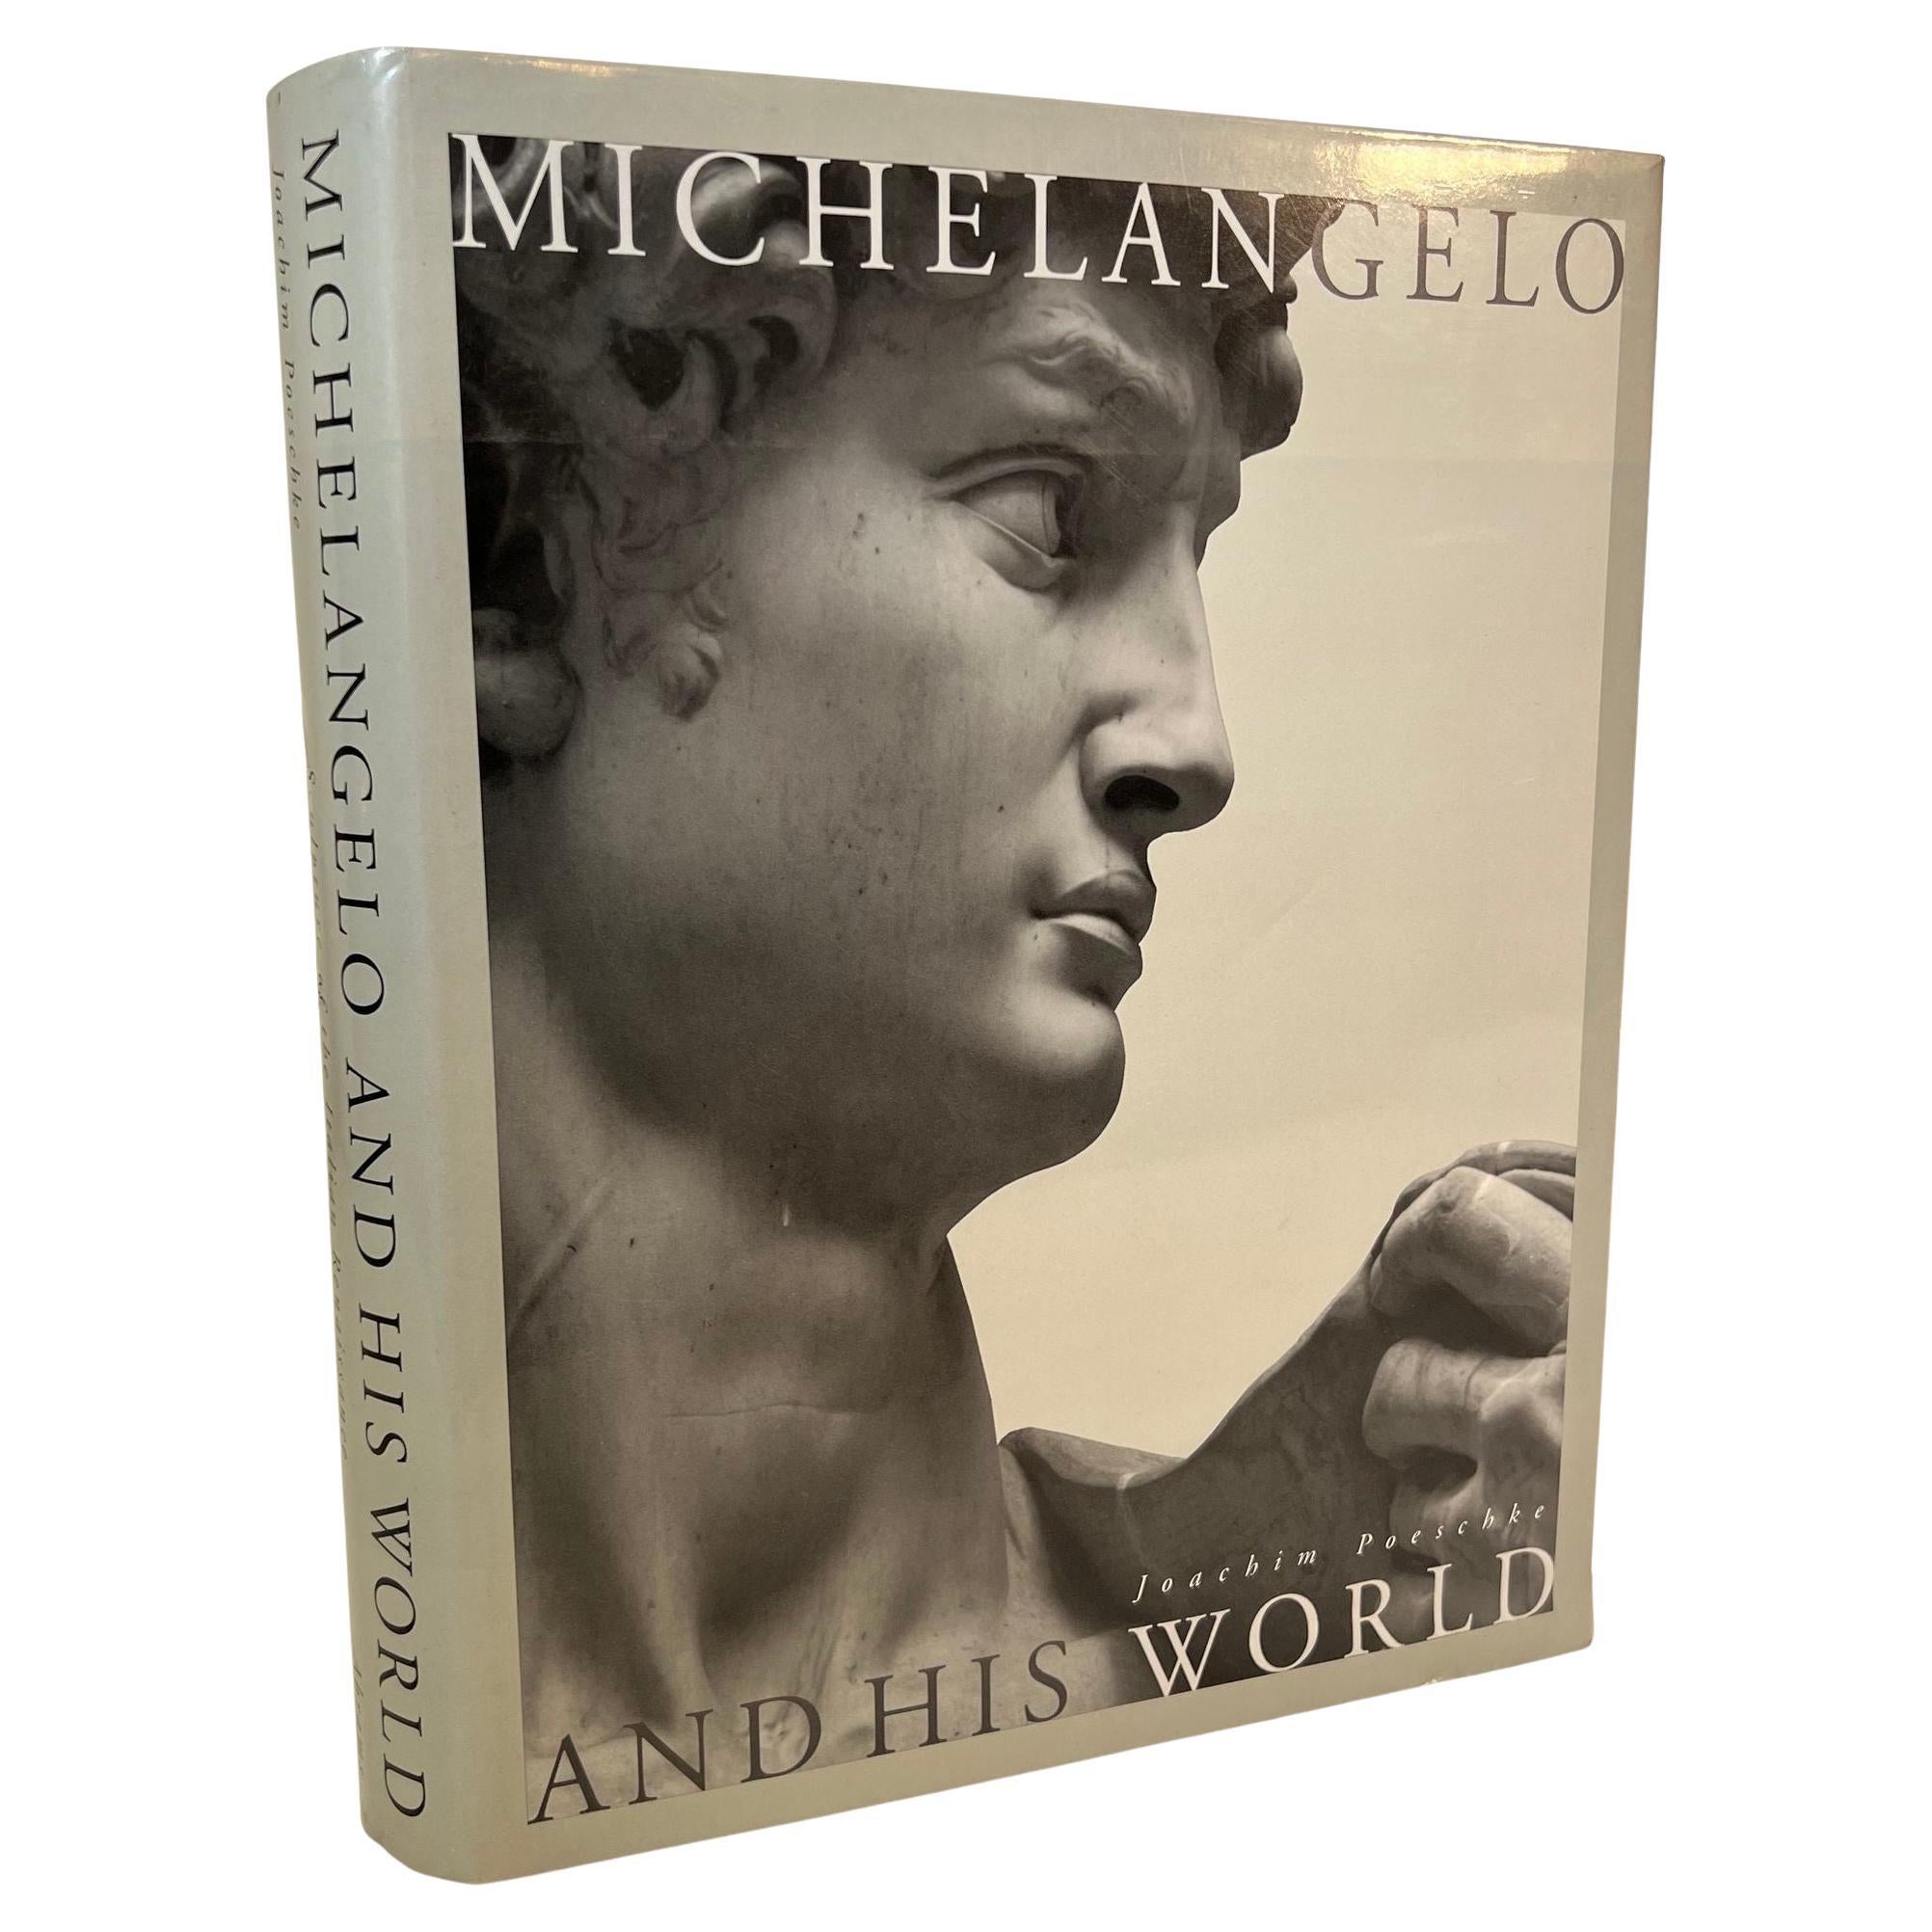 1996 Michelangelo And His World Hardcover book by Joachim Poeschke For Sale